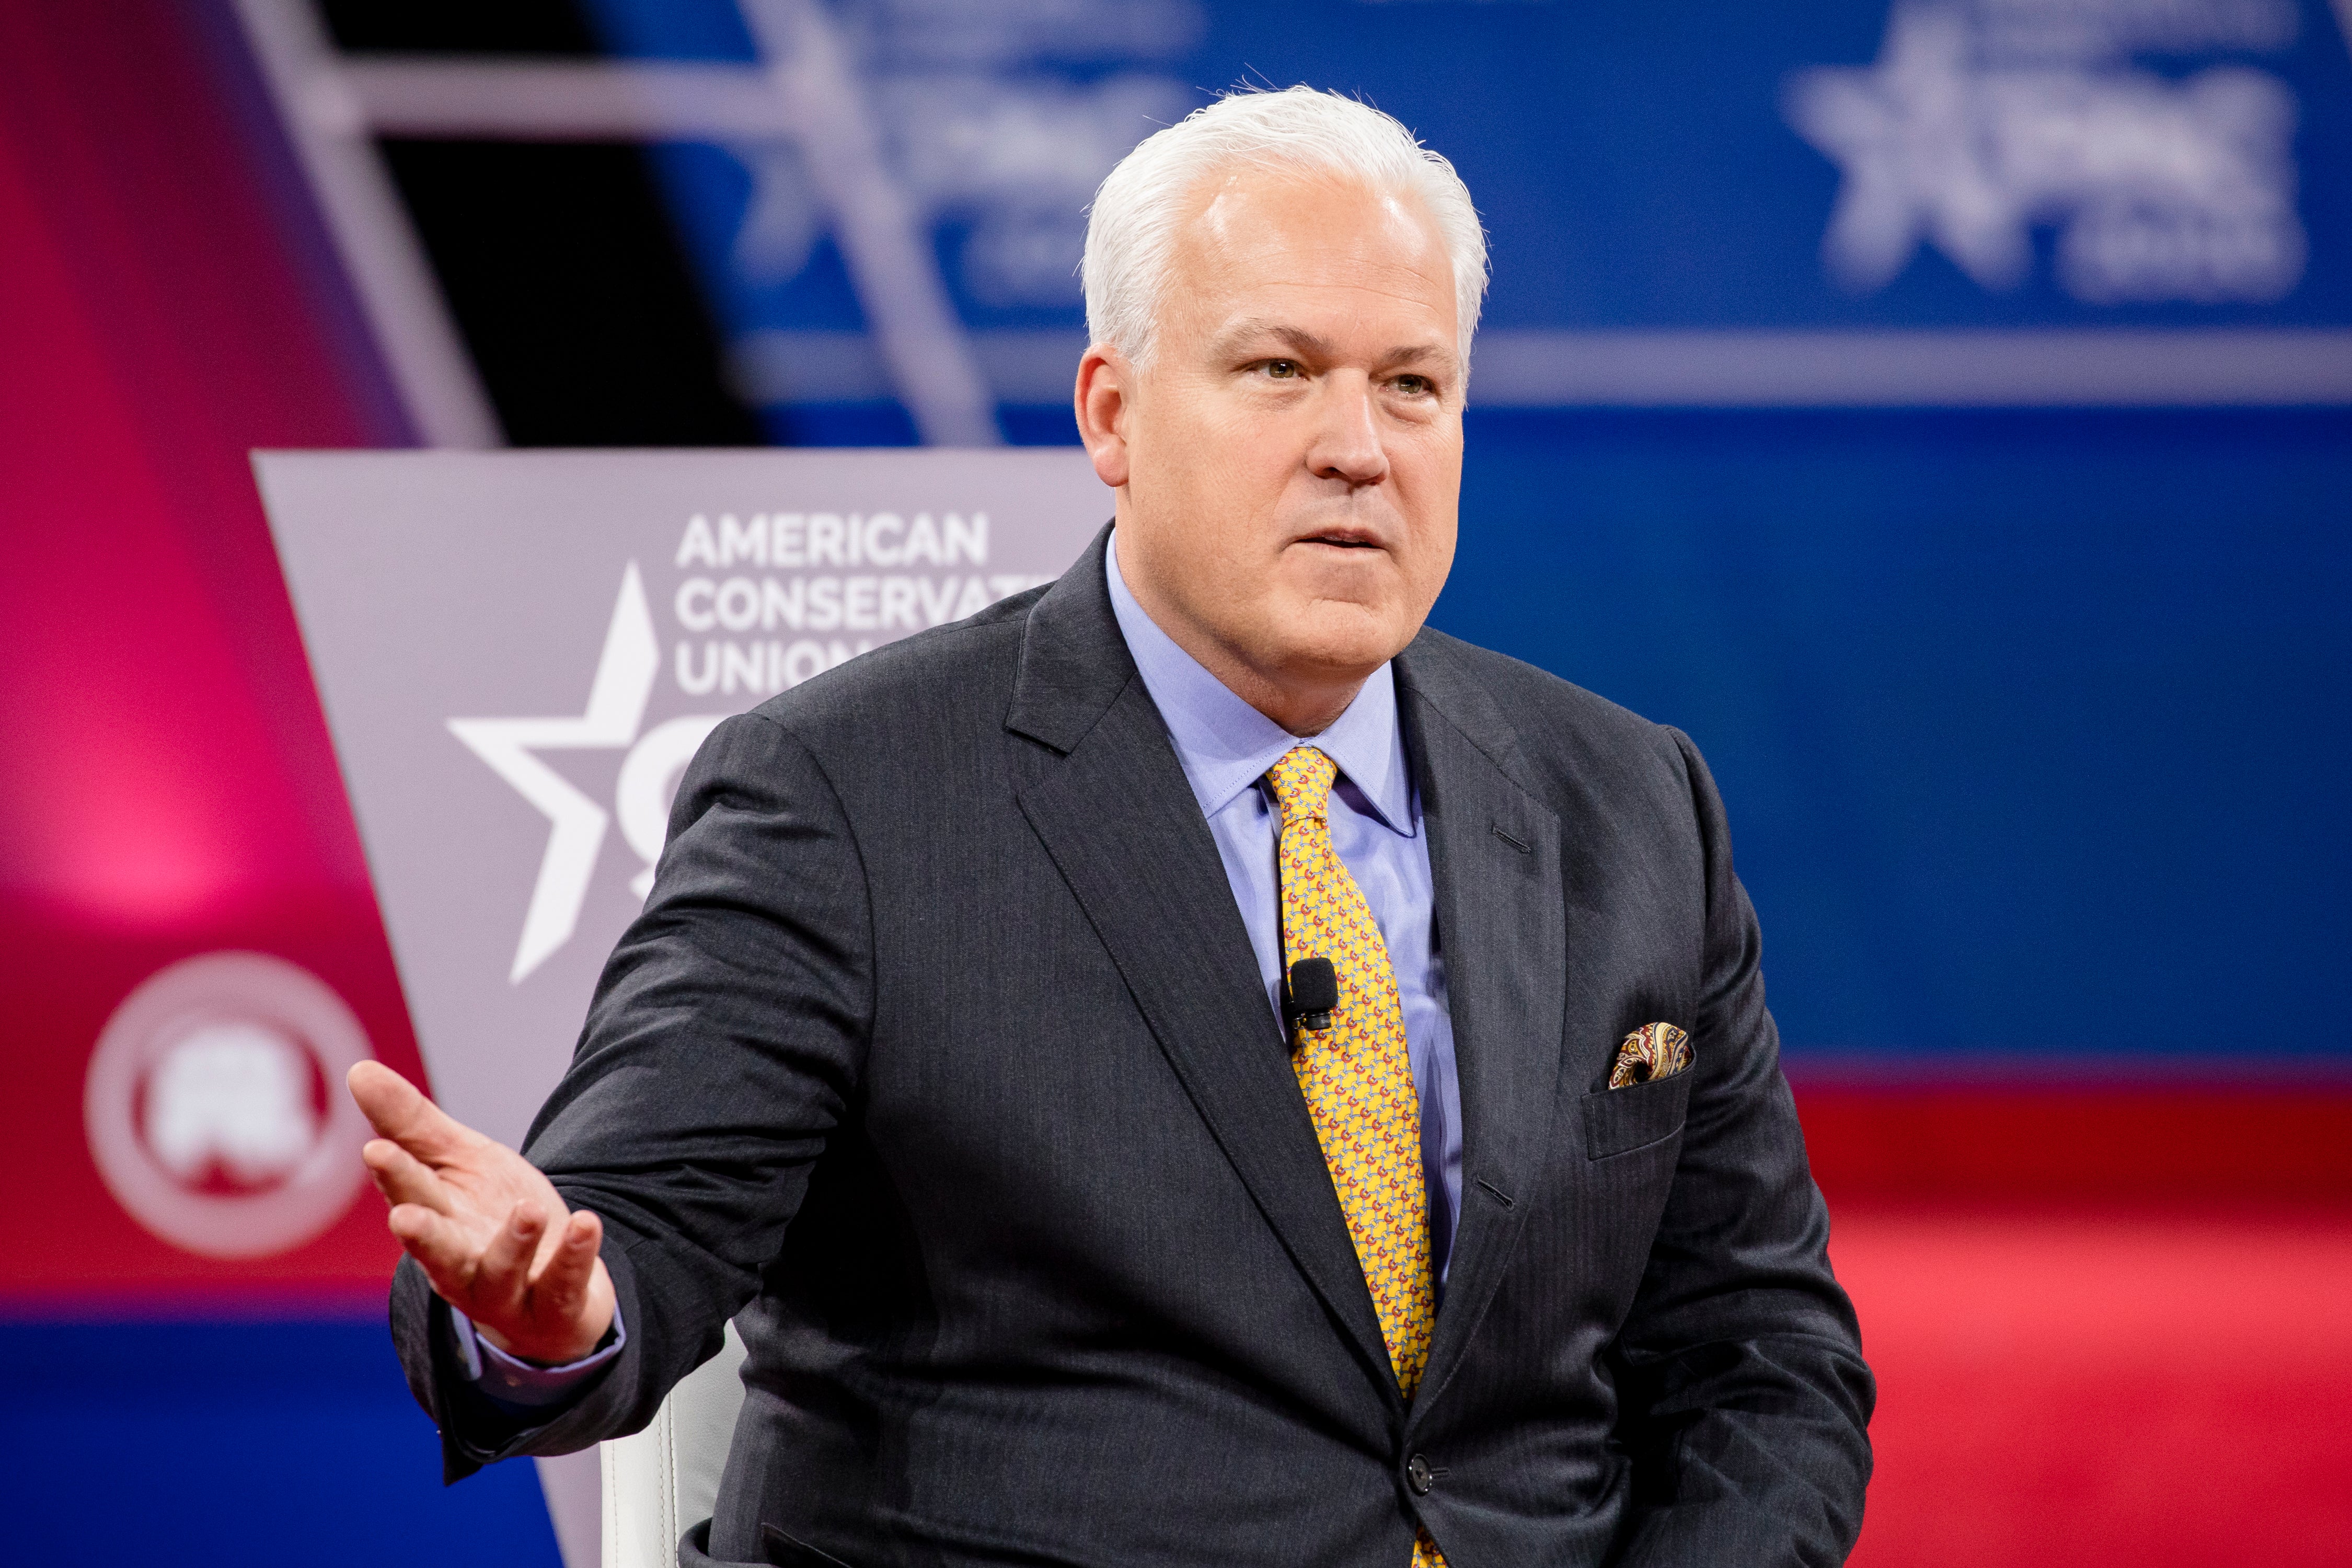 Matt Schlapp, Chairman of the American Conservative Union, speaks during the Conservative Political Action Conference 2020 (CPAC) hosted by the American Conservative Union on February 28, 2020 in National Harbor, MD. (Photo by Samuel Corum/Getty Images)